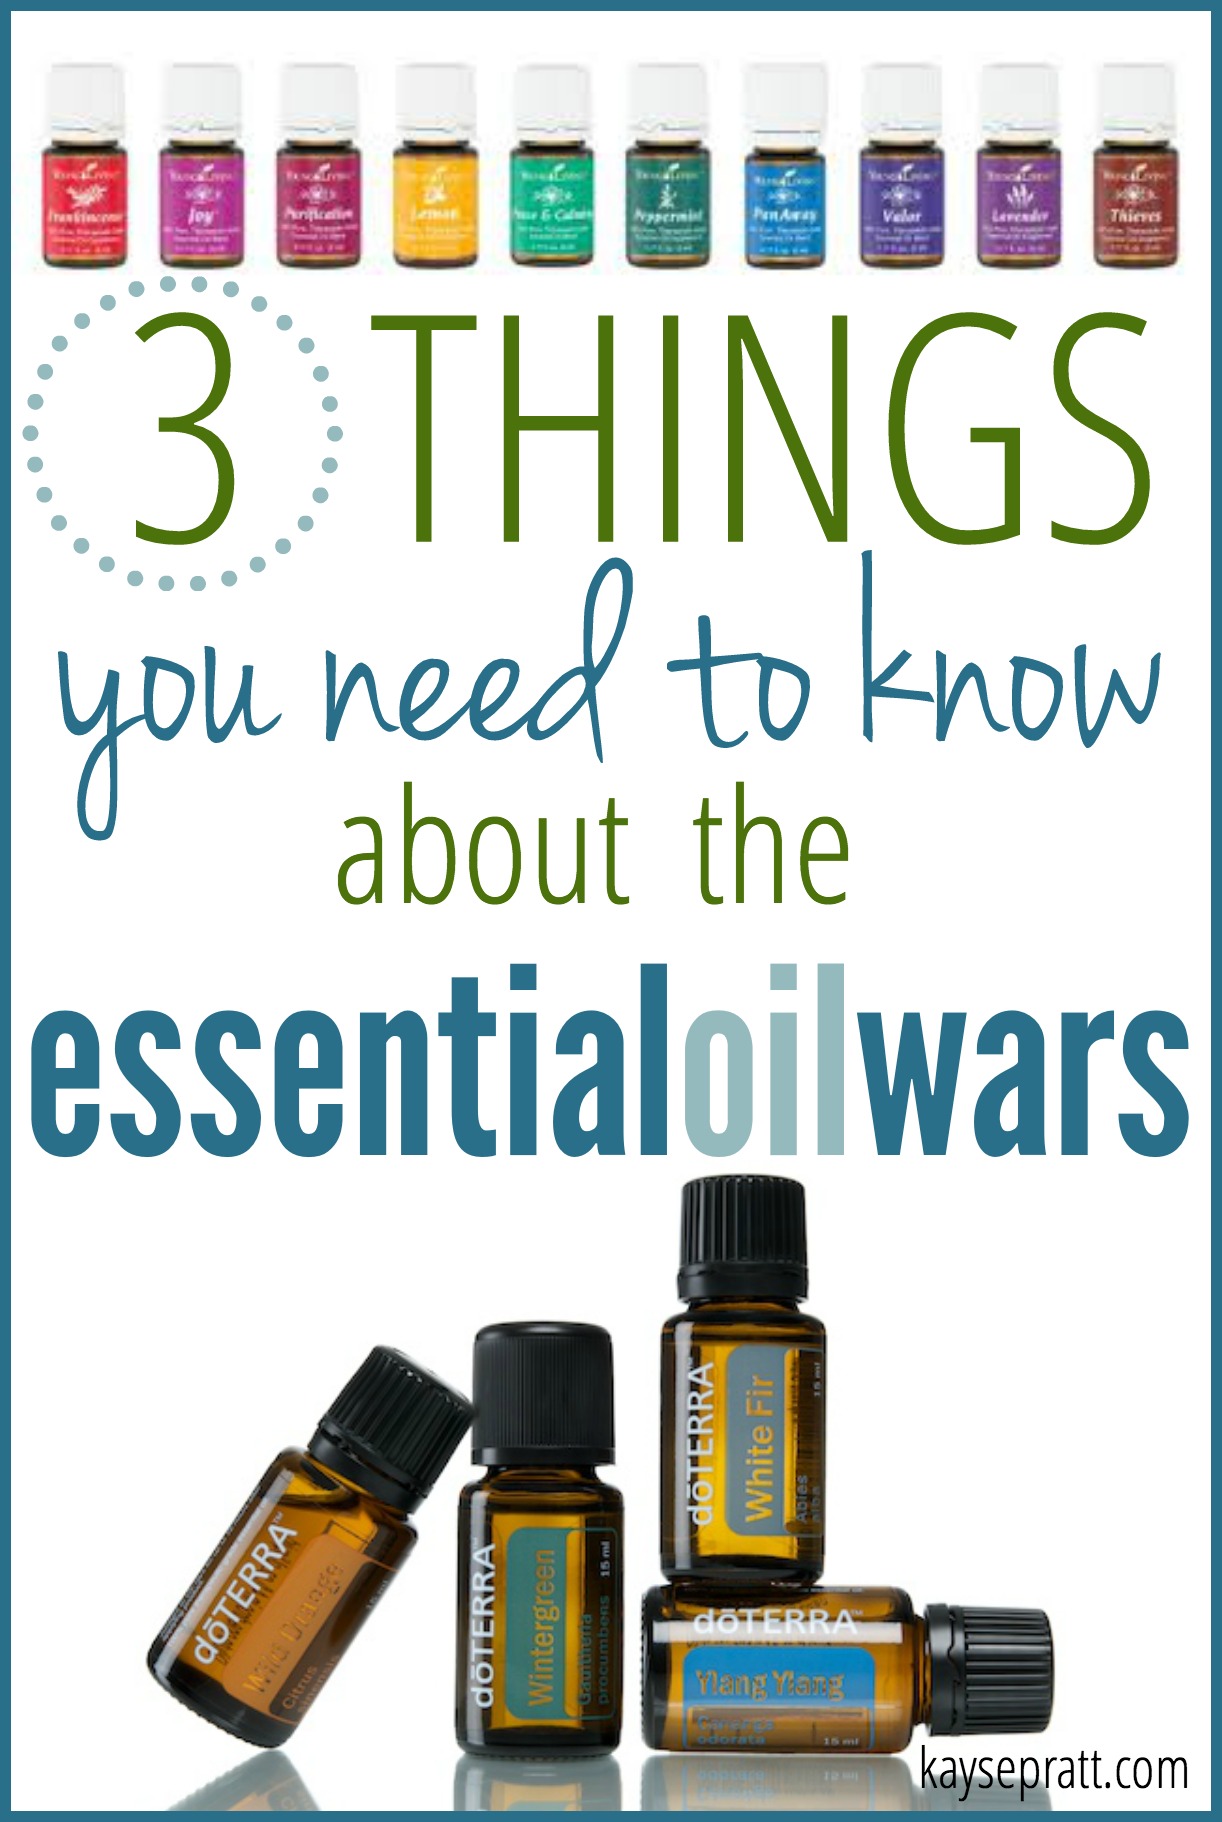 The 3 Things You Need To Know About The Essential Oil Wars